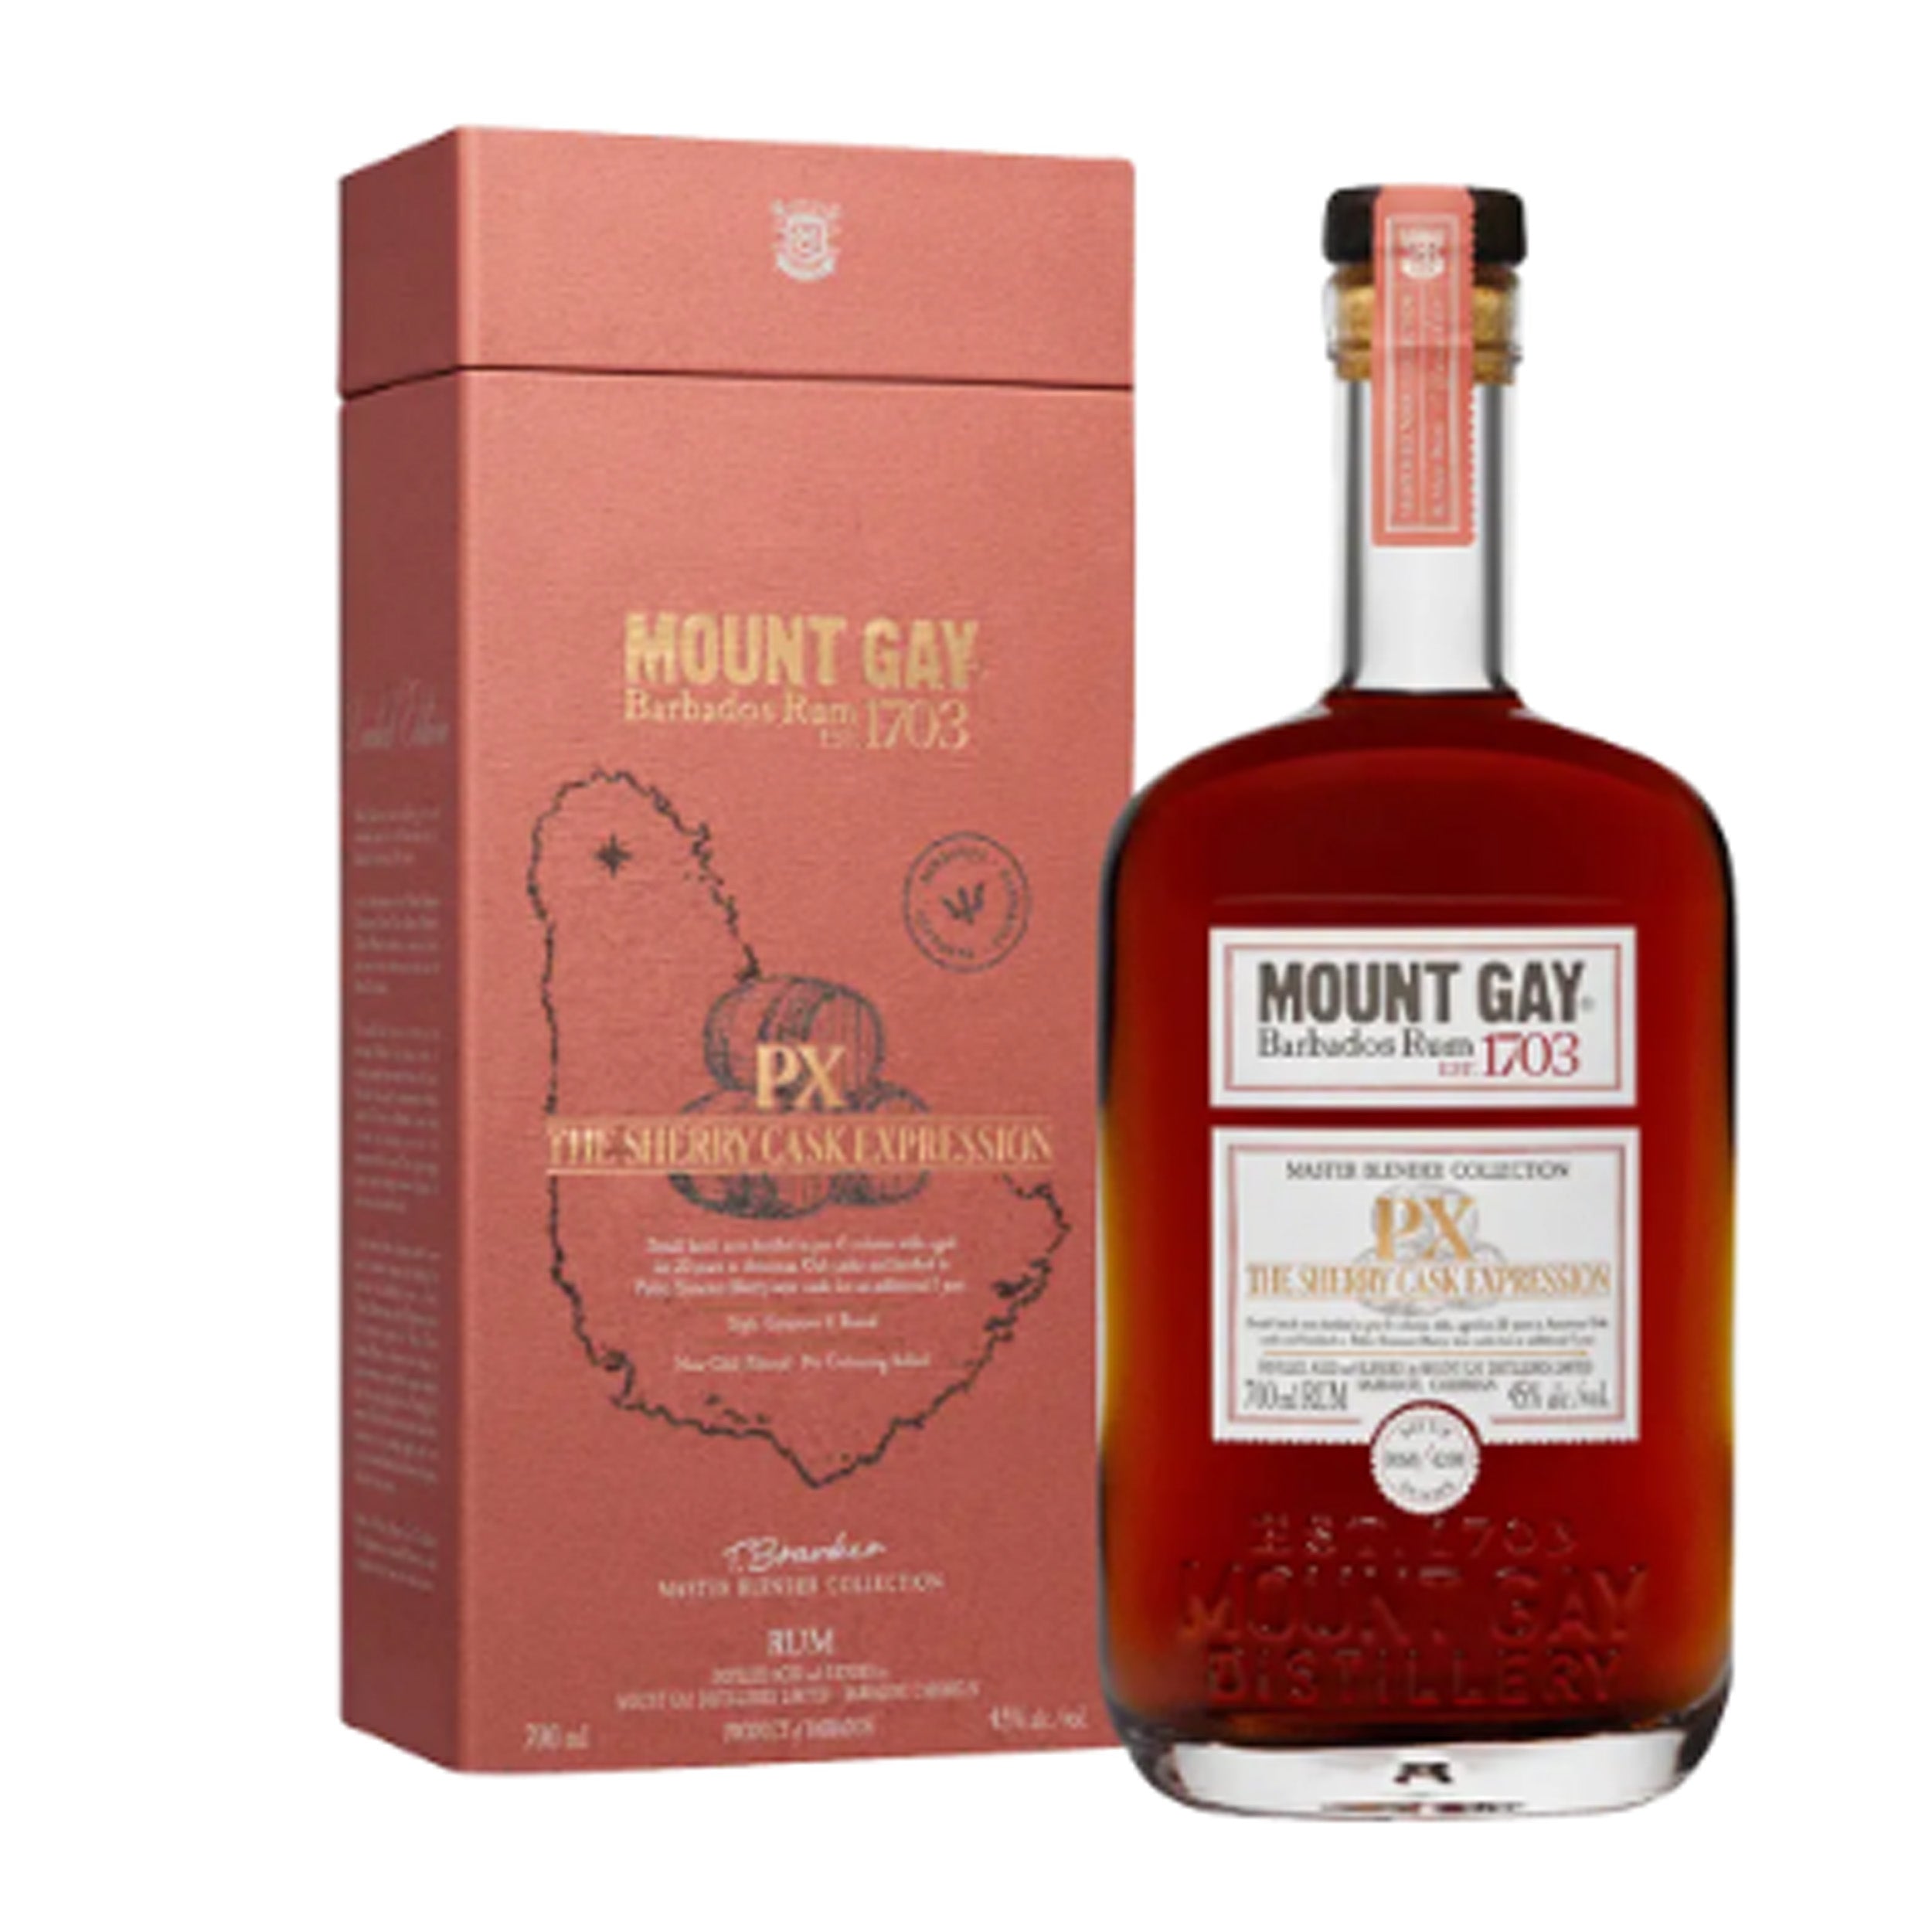 Mount Gay 1703 Edition The Sherry Cask Expression